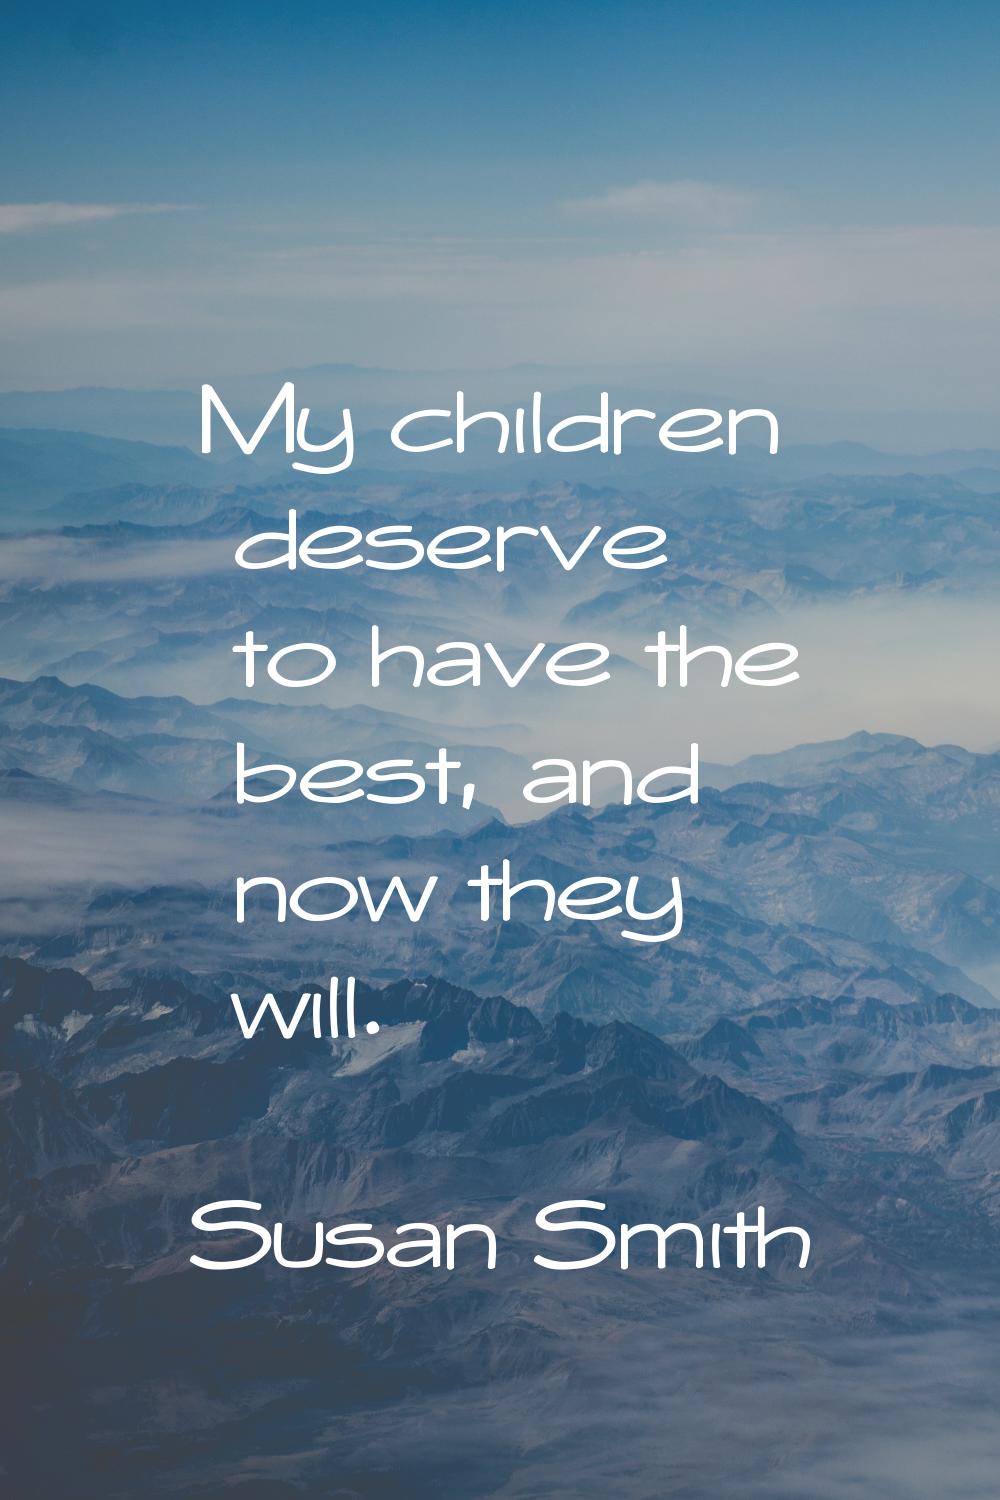 My children deserve to have the best, and now they will.